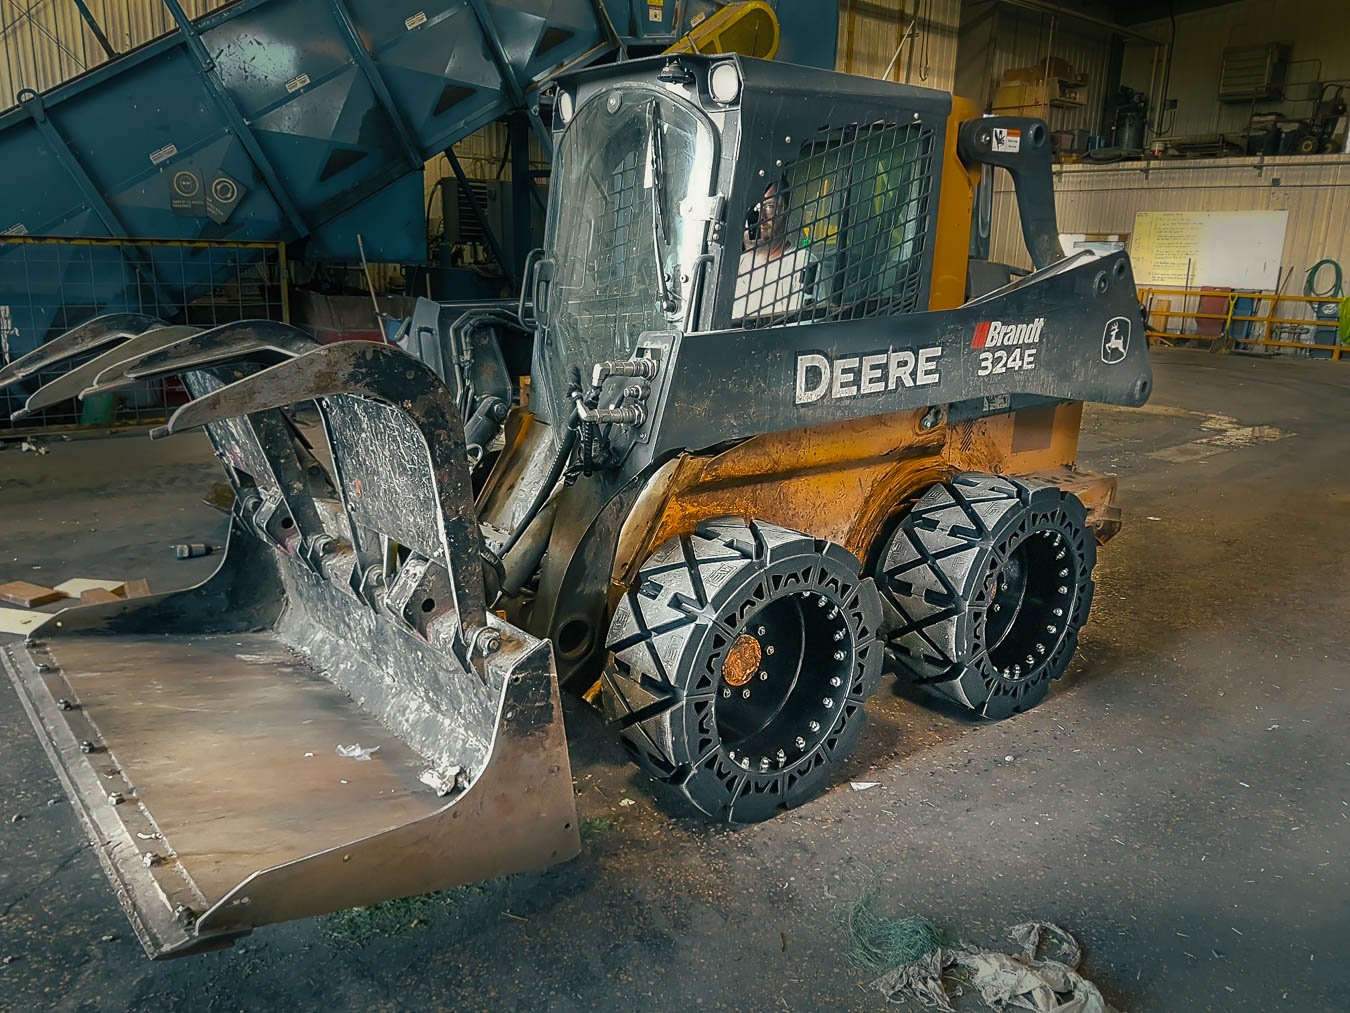 This image shows a DEERE 324E with our 14x17.5 Solid Skid Steer Tires